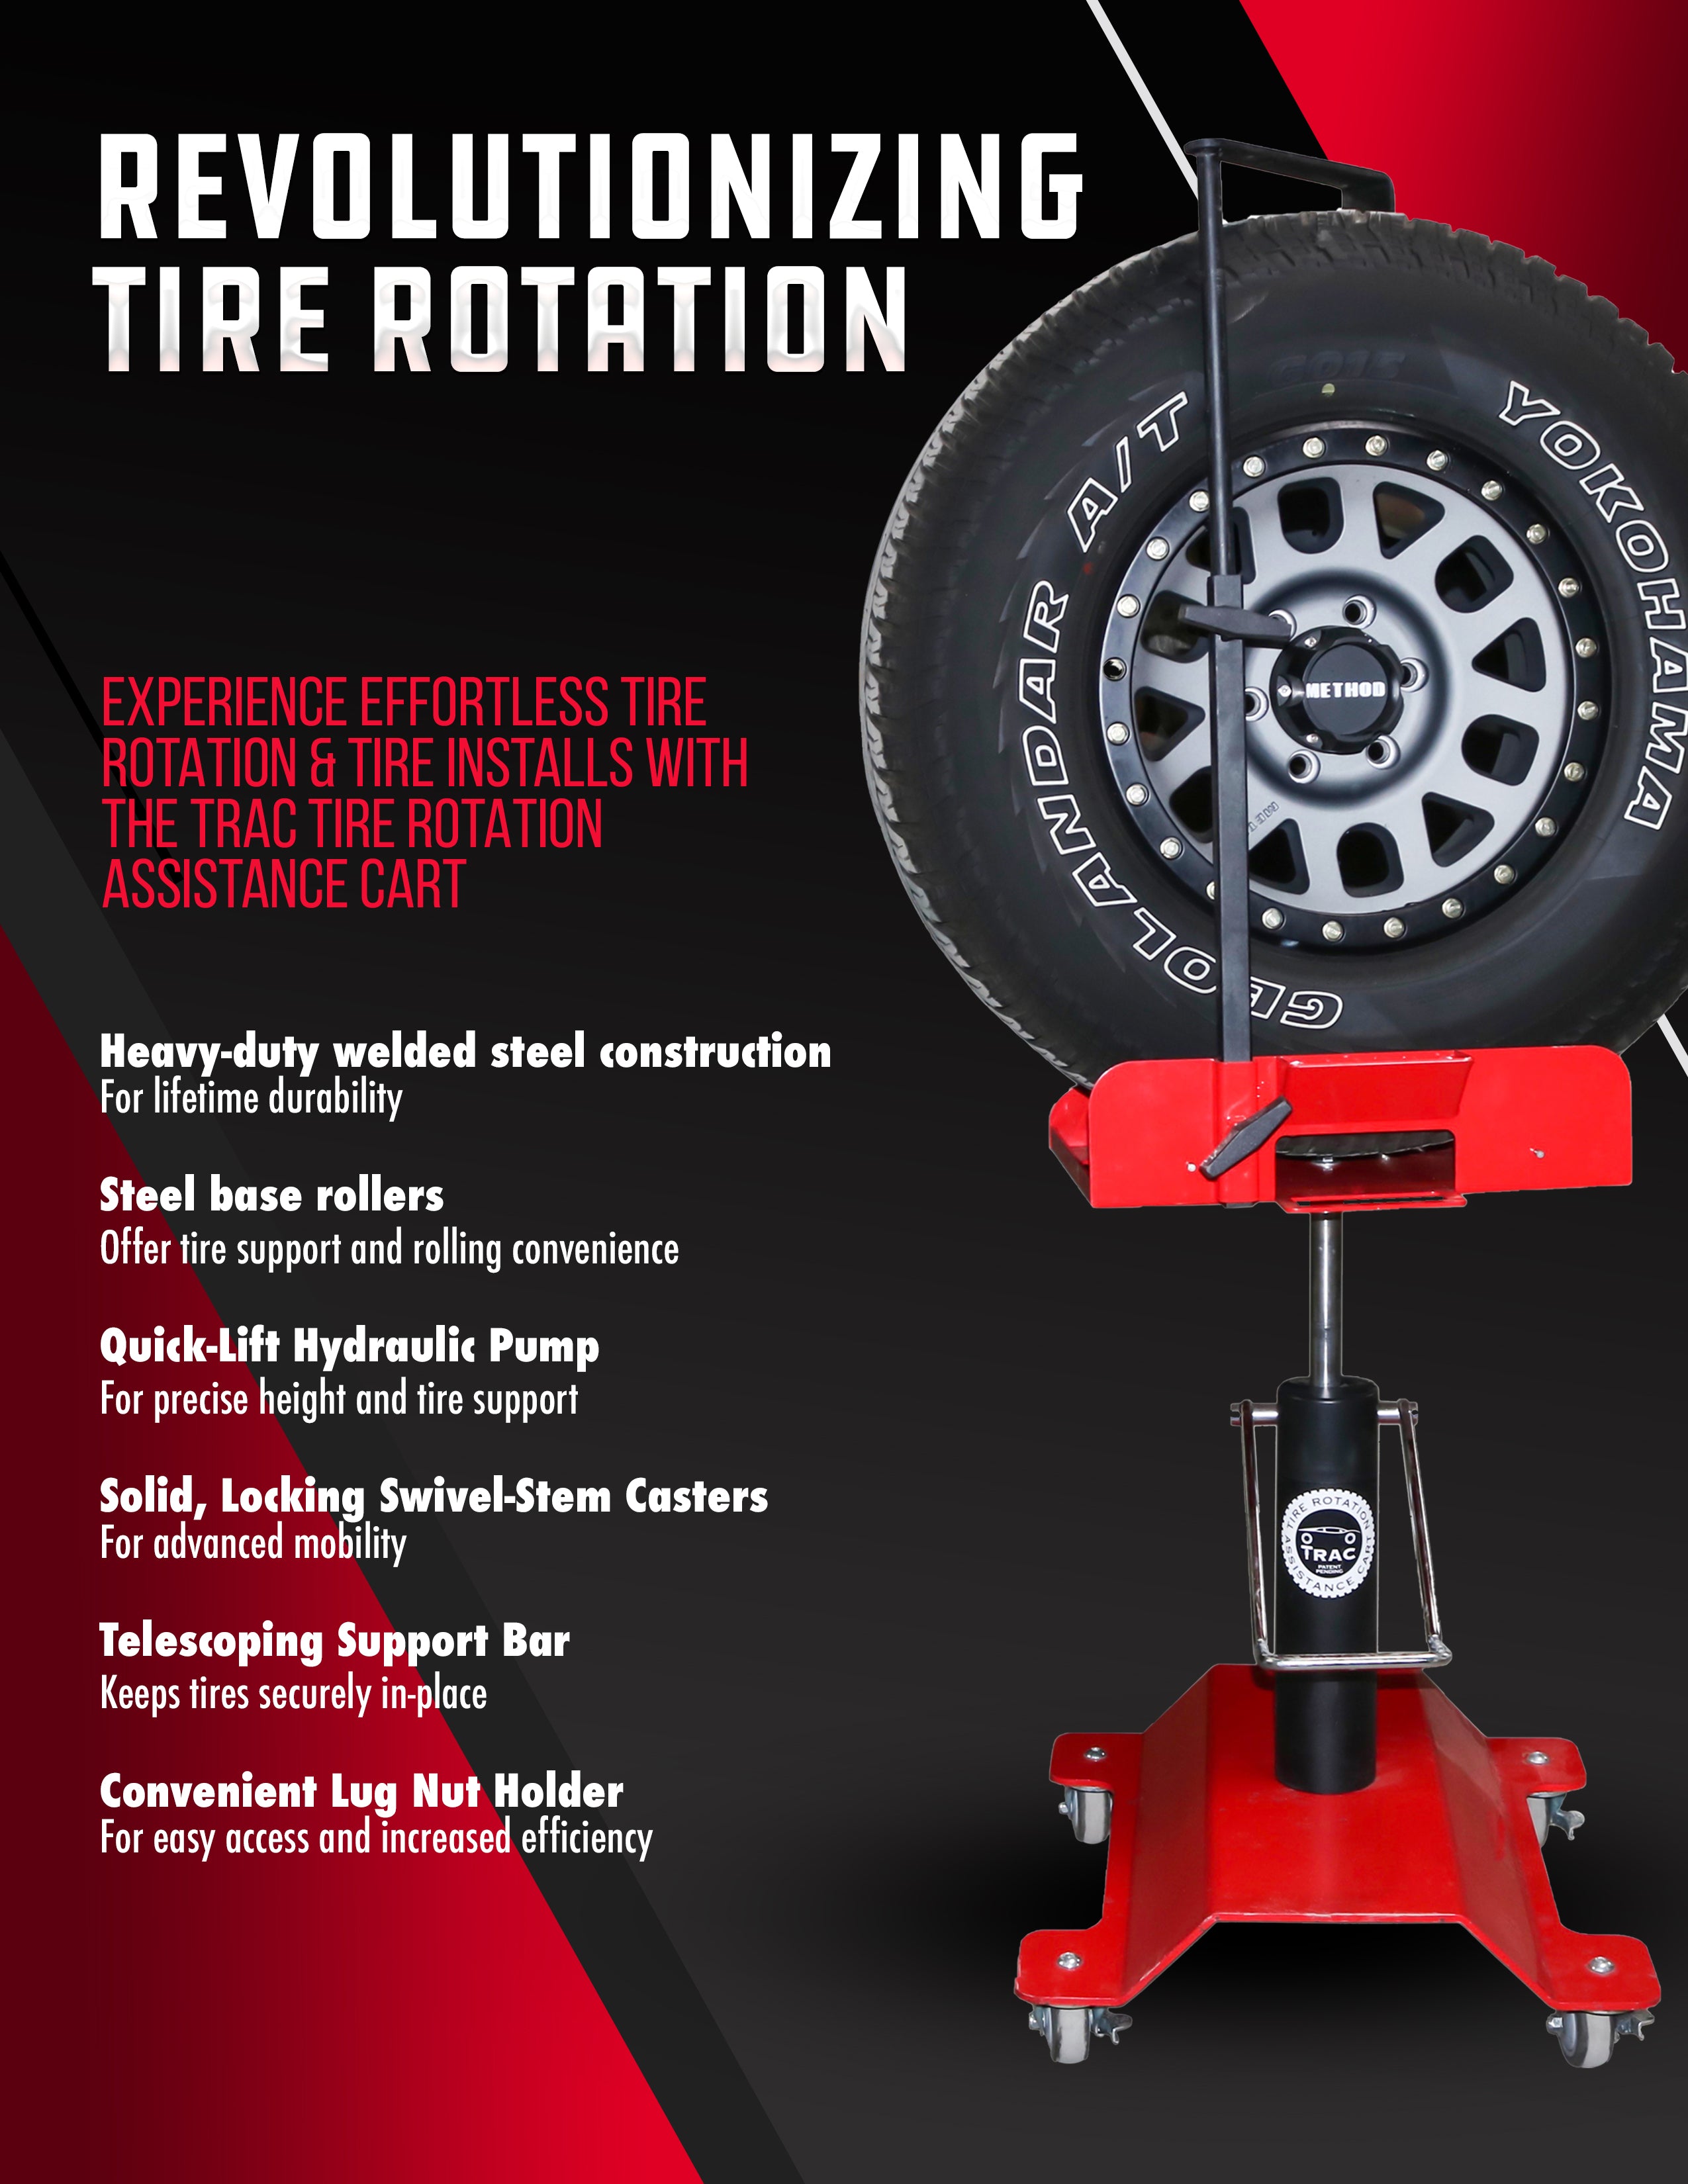 TRAC Tire Rotation Assistance Cart - Fast, Efficient, Safe Tire Rotations and Installs